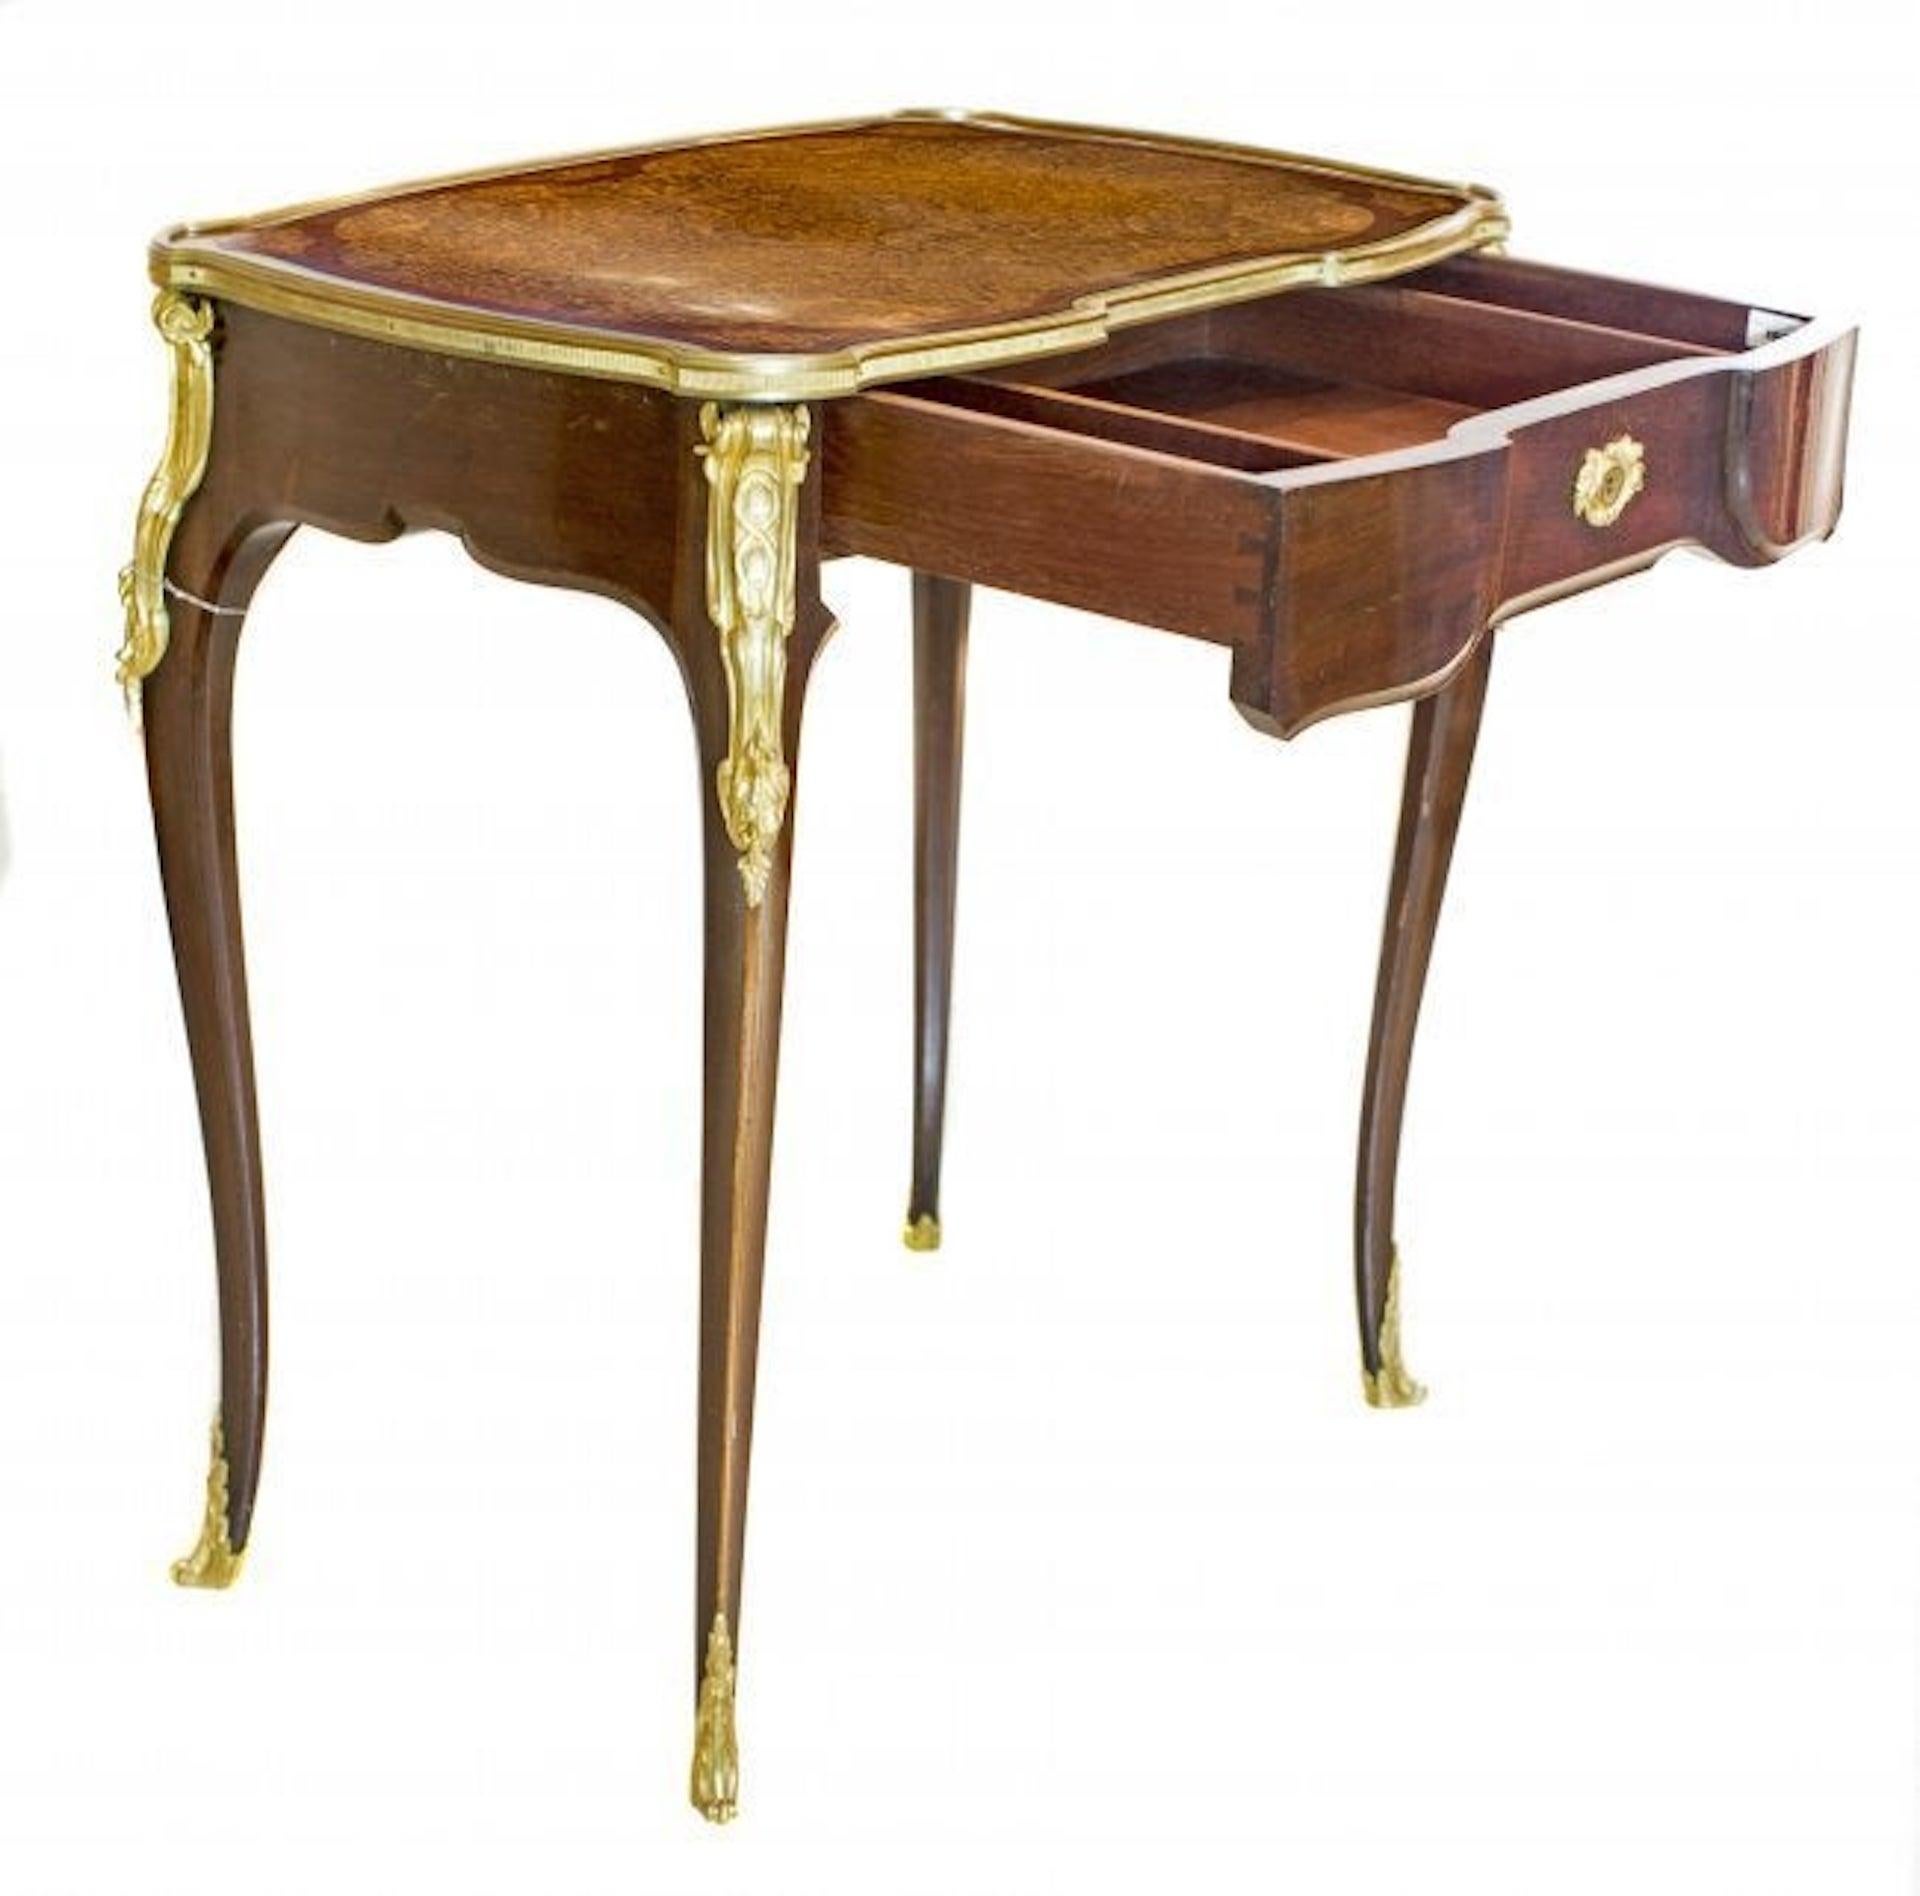 François Linke Table a Ecrire, Index Number 1660 In Good Condition For Sale In West Palm Beach, FL